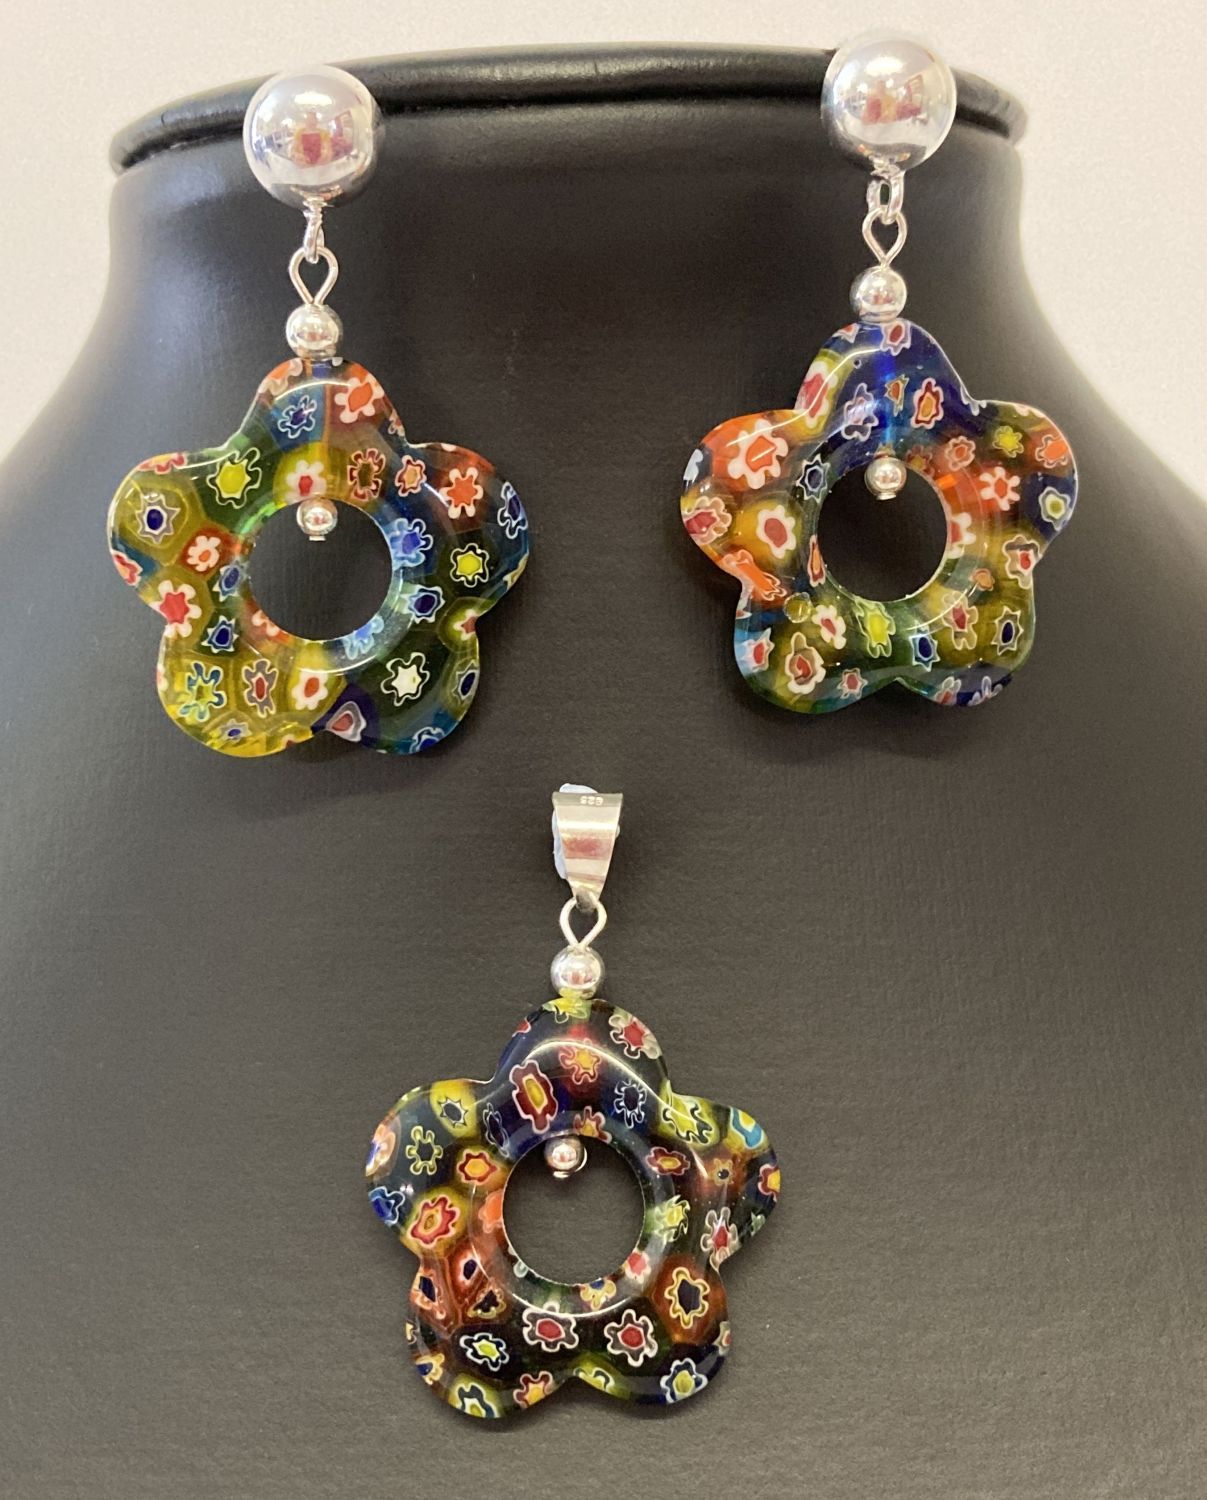 A Millefiori glass flower shaped pendant and matching earrings sets.